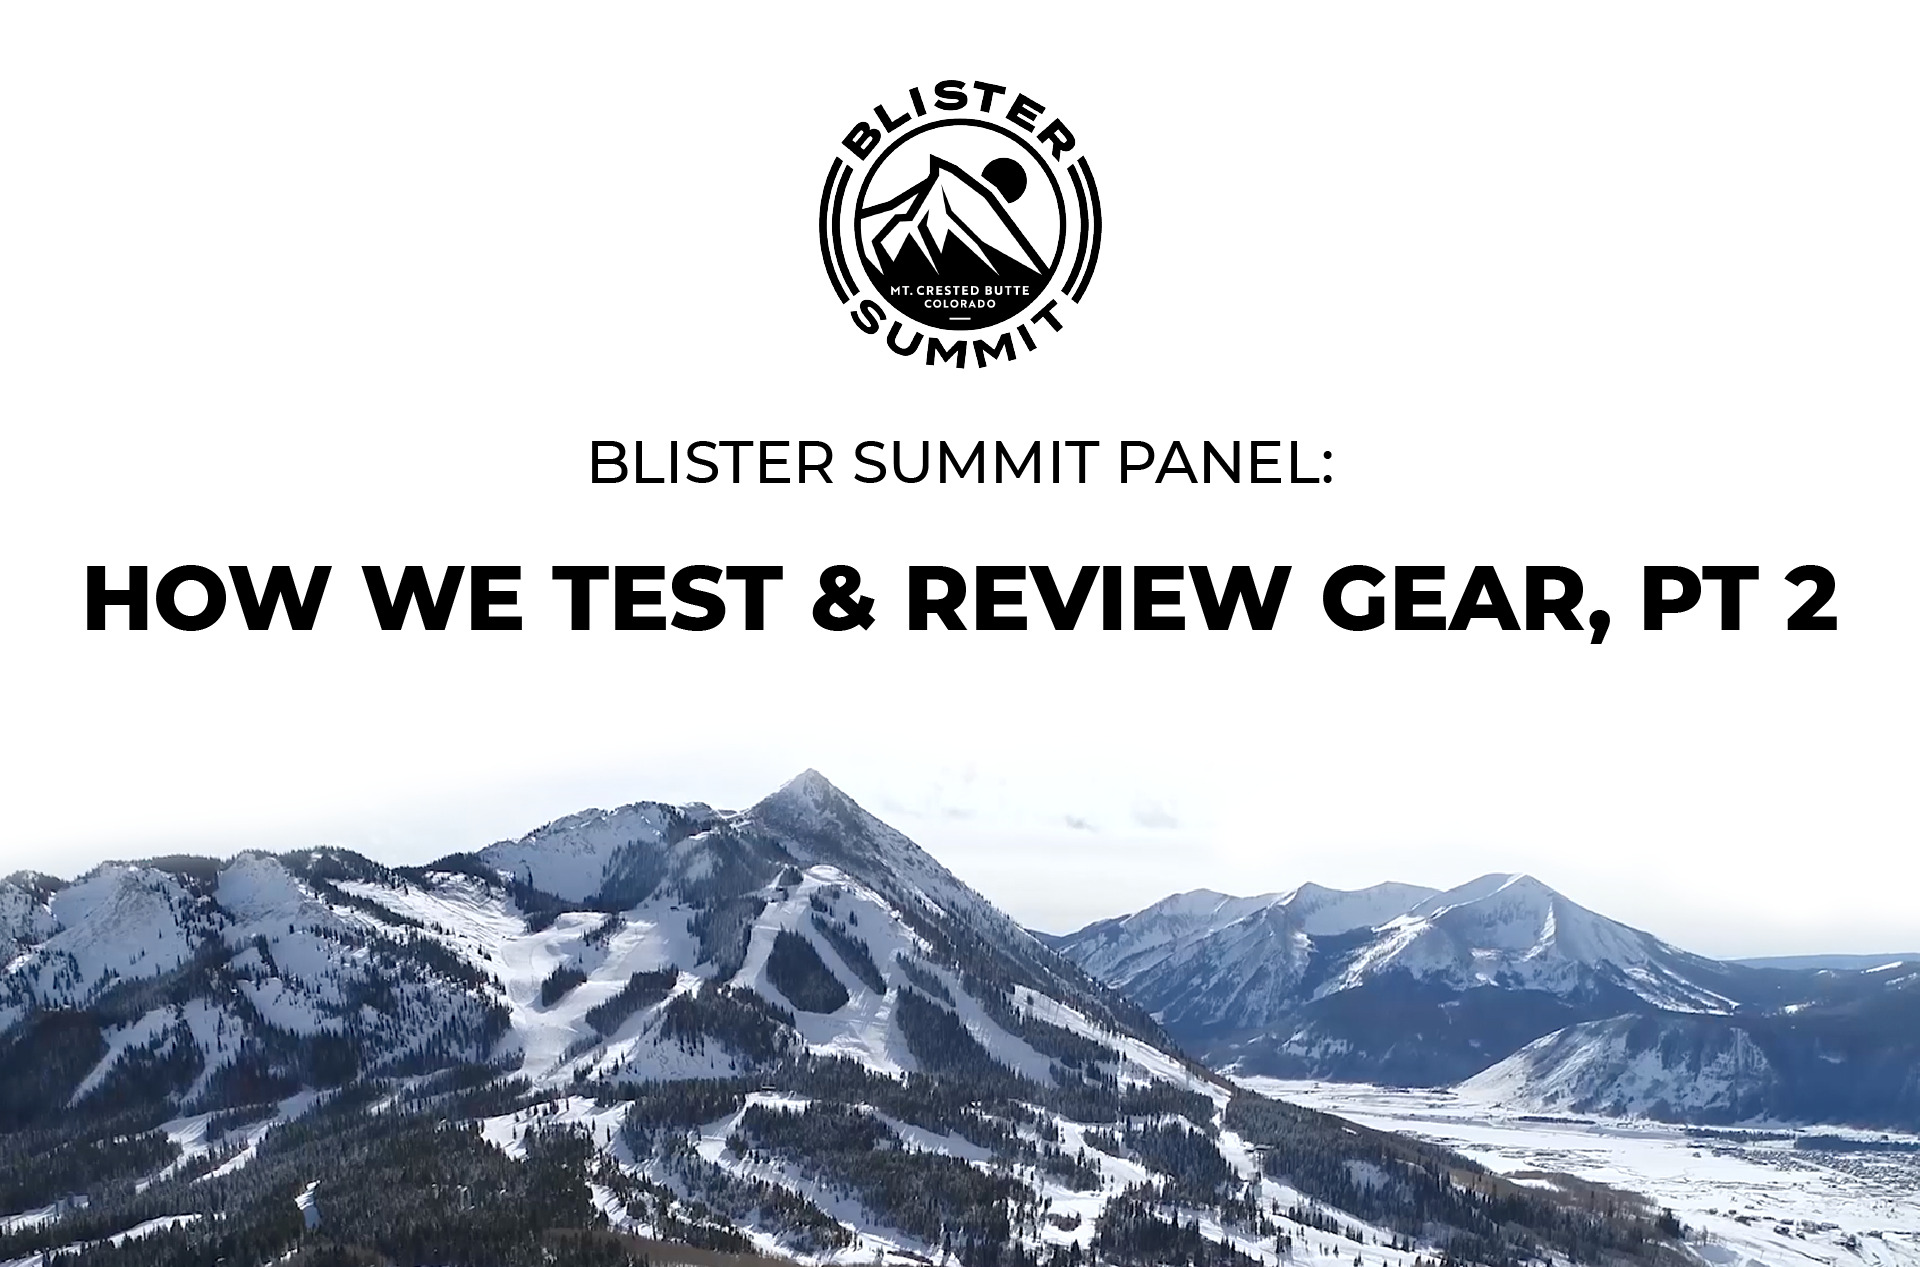 In Part Two of our panel on gear testing, Blister reviewers, Luke Koppa, Kristin Sinnott, Jonathan Ellsworth, and Sascha Anastas provide their perspectives about how they approach testing and reviewing gear; how this applies to anyone trying something new; how to make the most of a ski demo; and more.